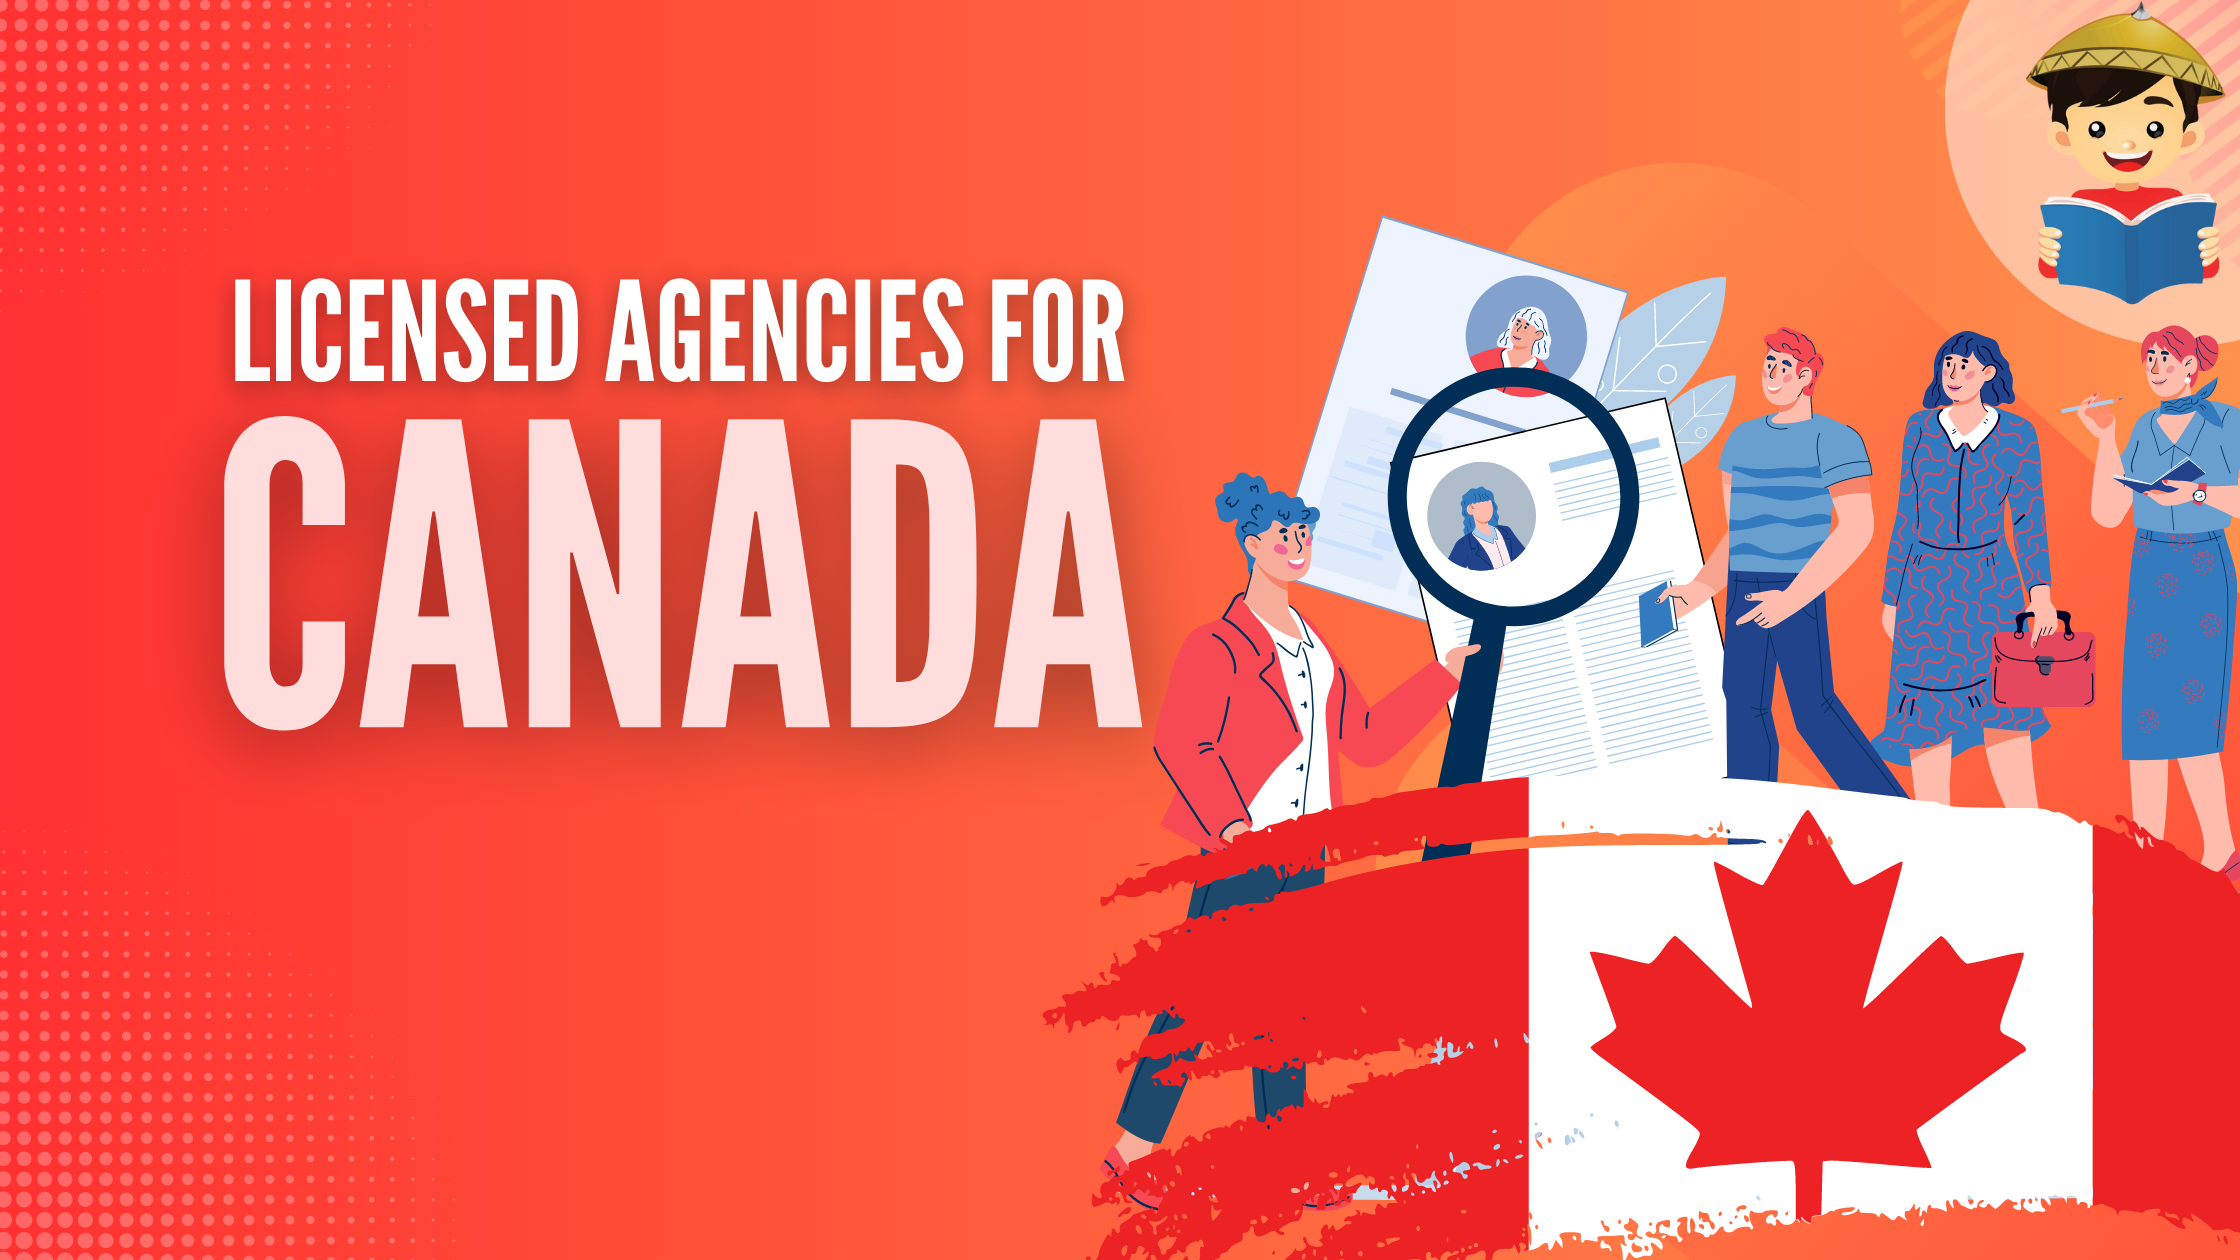 agency for canada jobs featured image